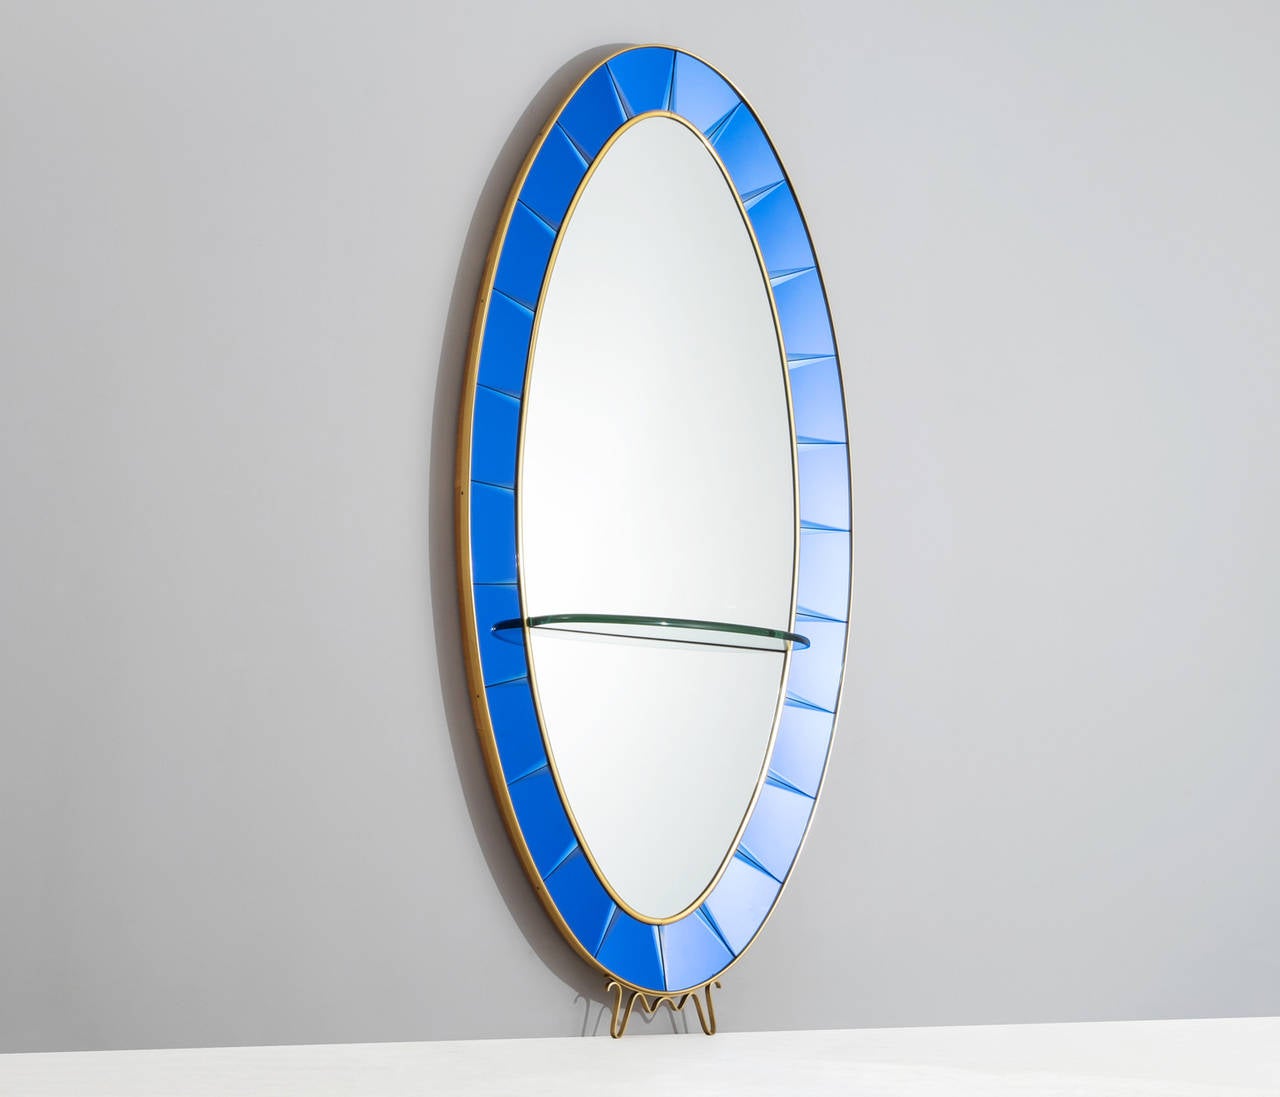 Crystal Art, mirror, glass, Italy, 1950s

The mirror is surrounded by beveled blue glass panels, placed in a gilt brass and wooden frame.The glass panels have been very well executed in typically Chrystal Arte cobalt blue. The brass frame holds a